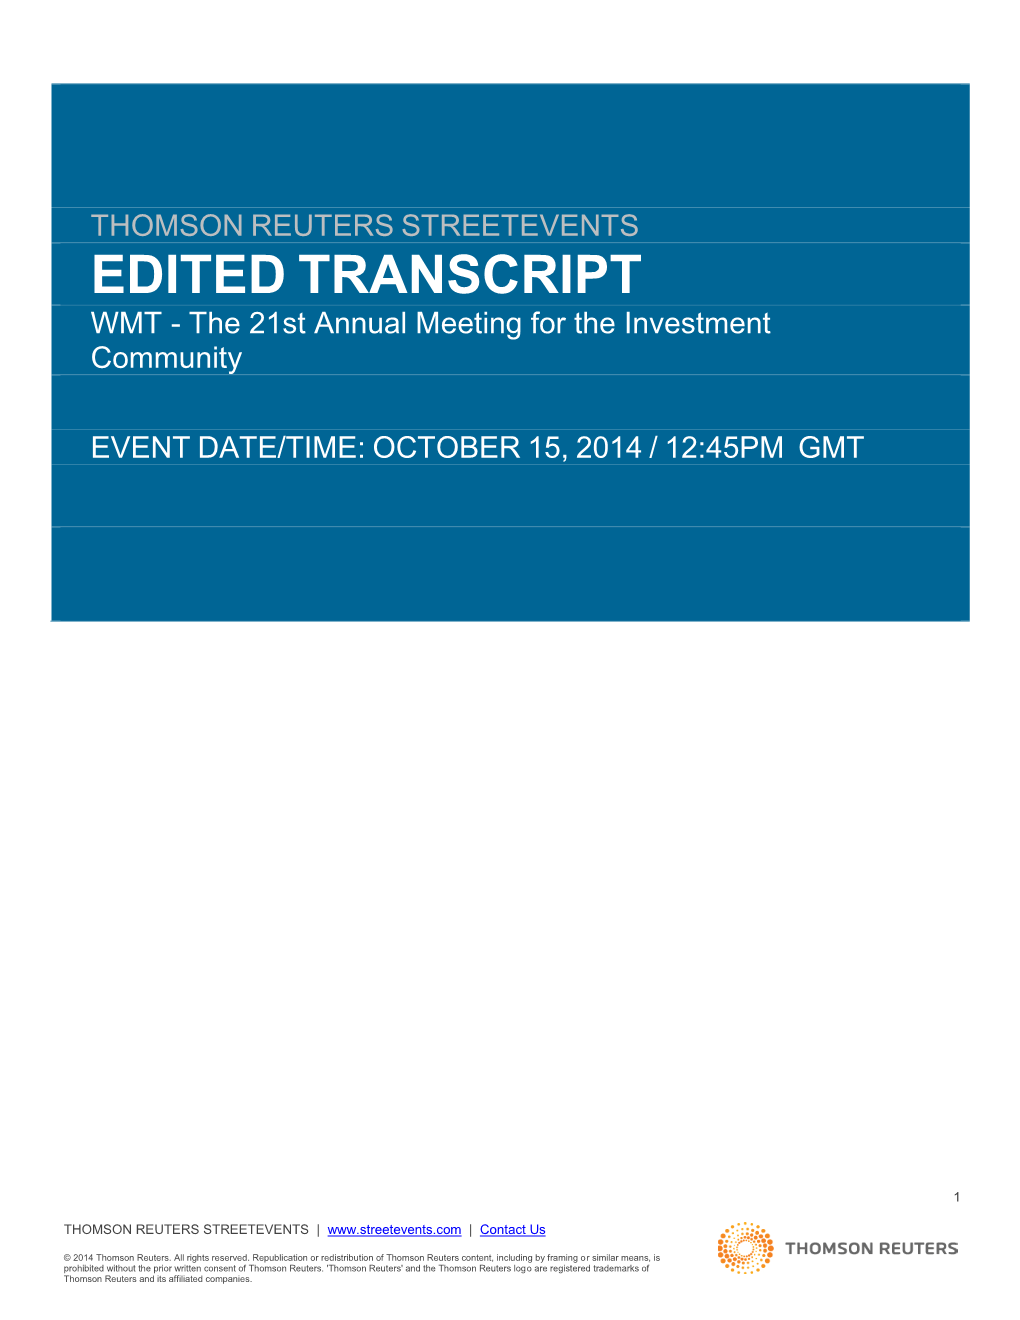 Event Transcripts Are Based, Companies May Make Projections Or Other Forward-Looking Statements Regarding a Variety of Items